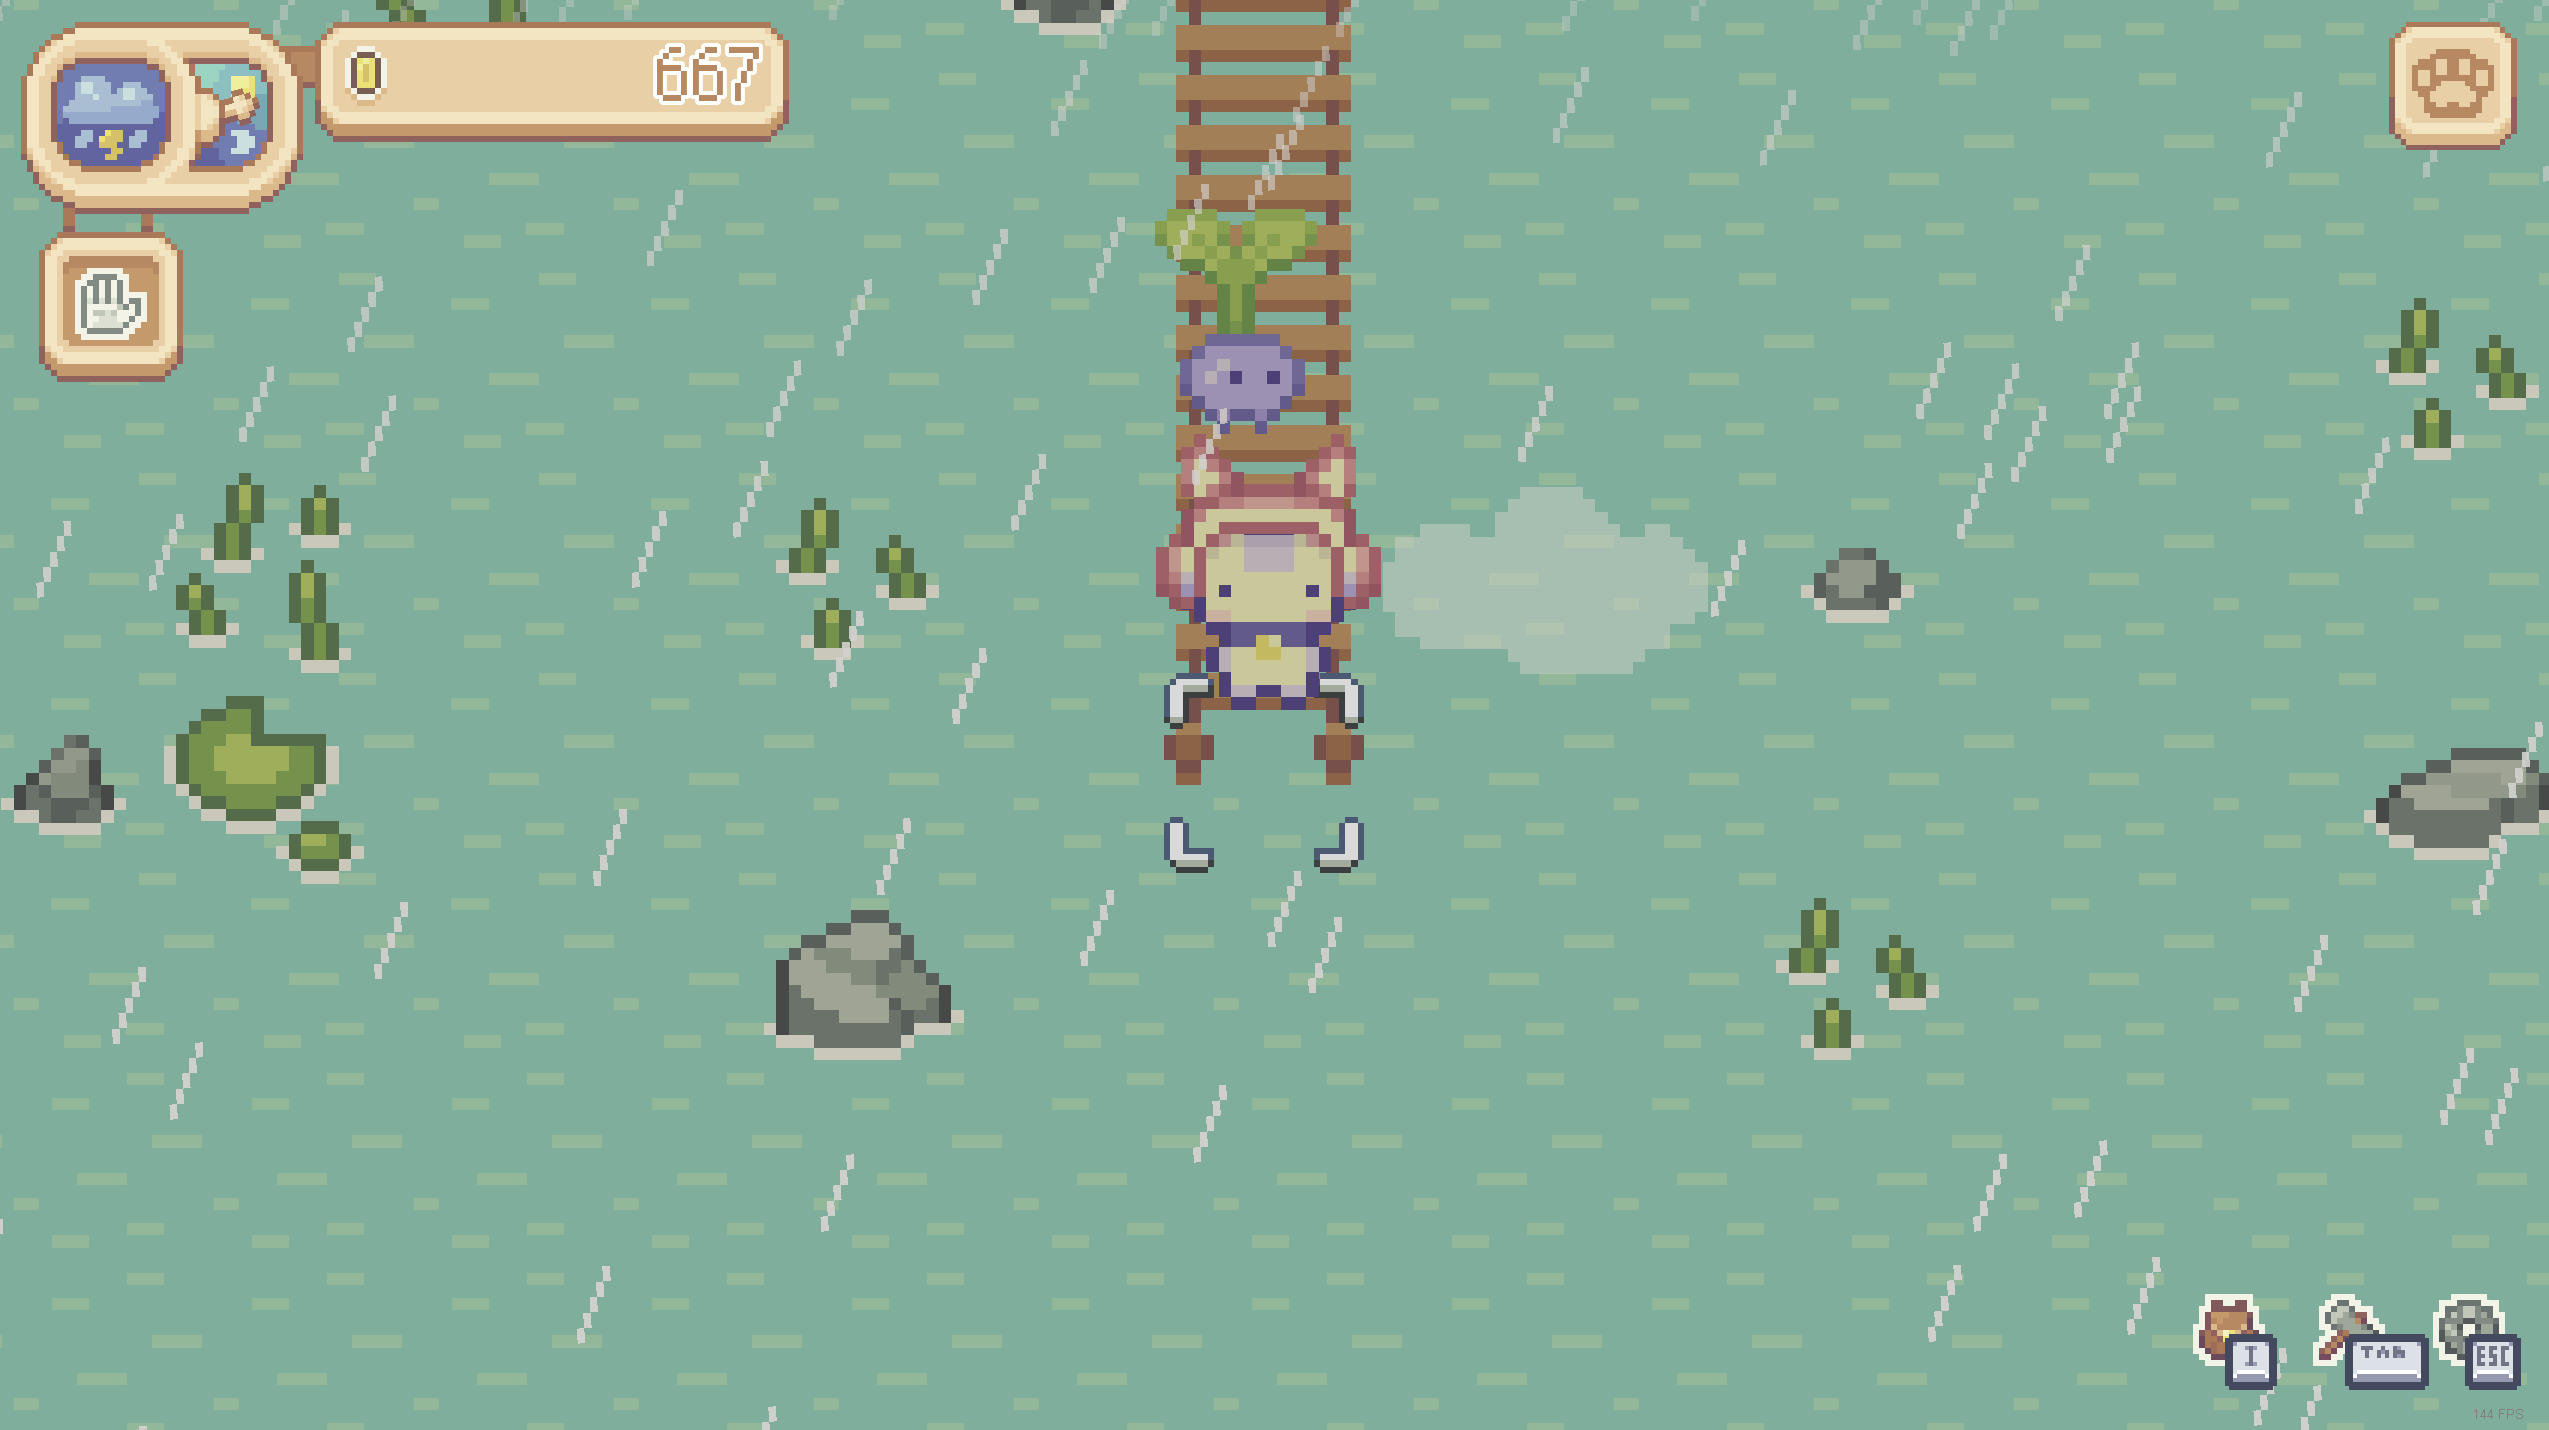 An image showing an in-game rainy day